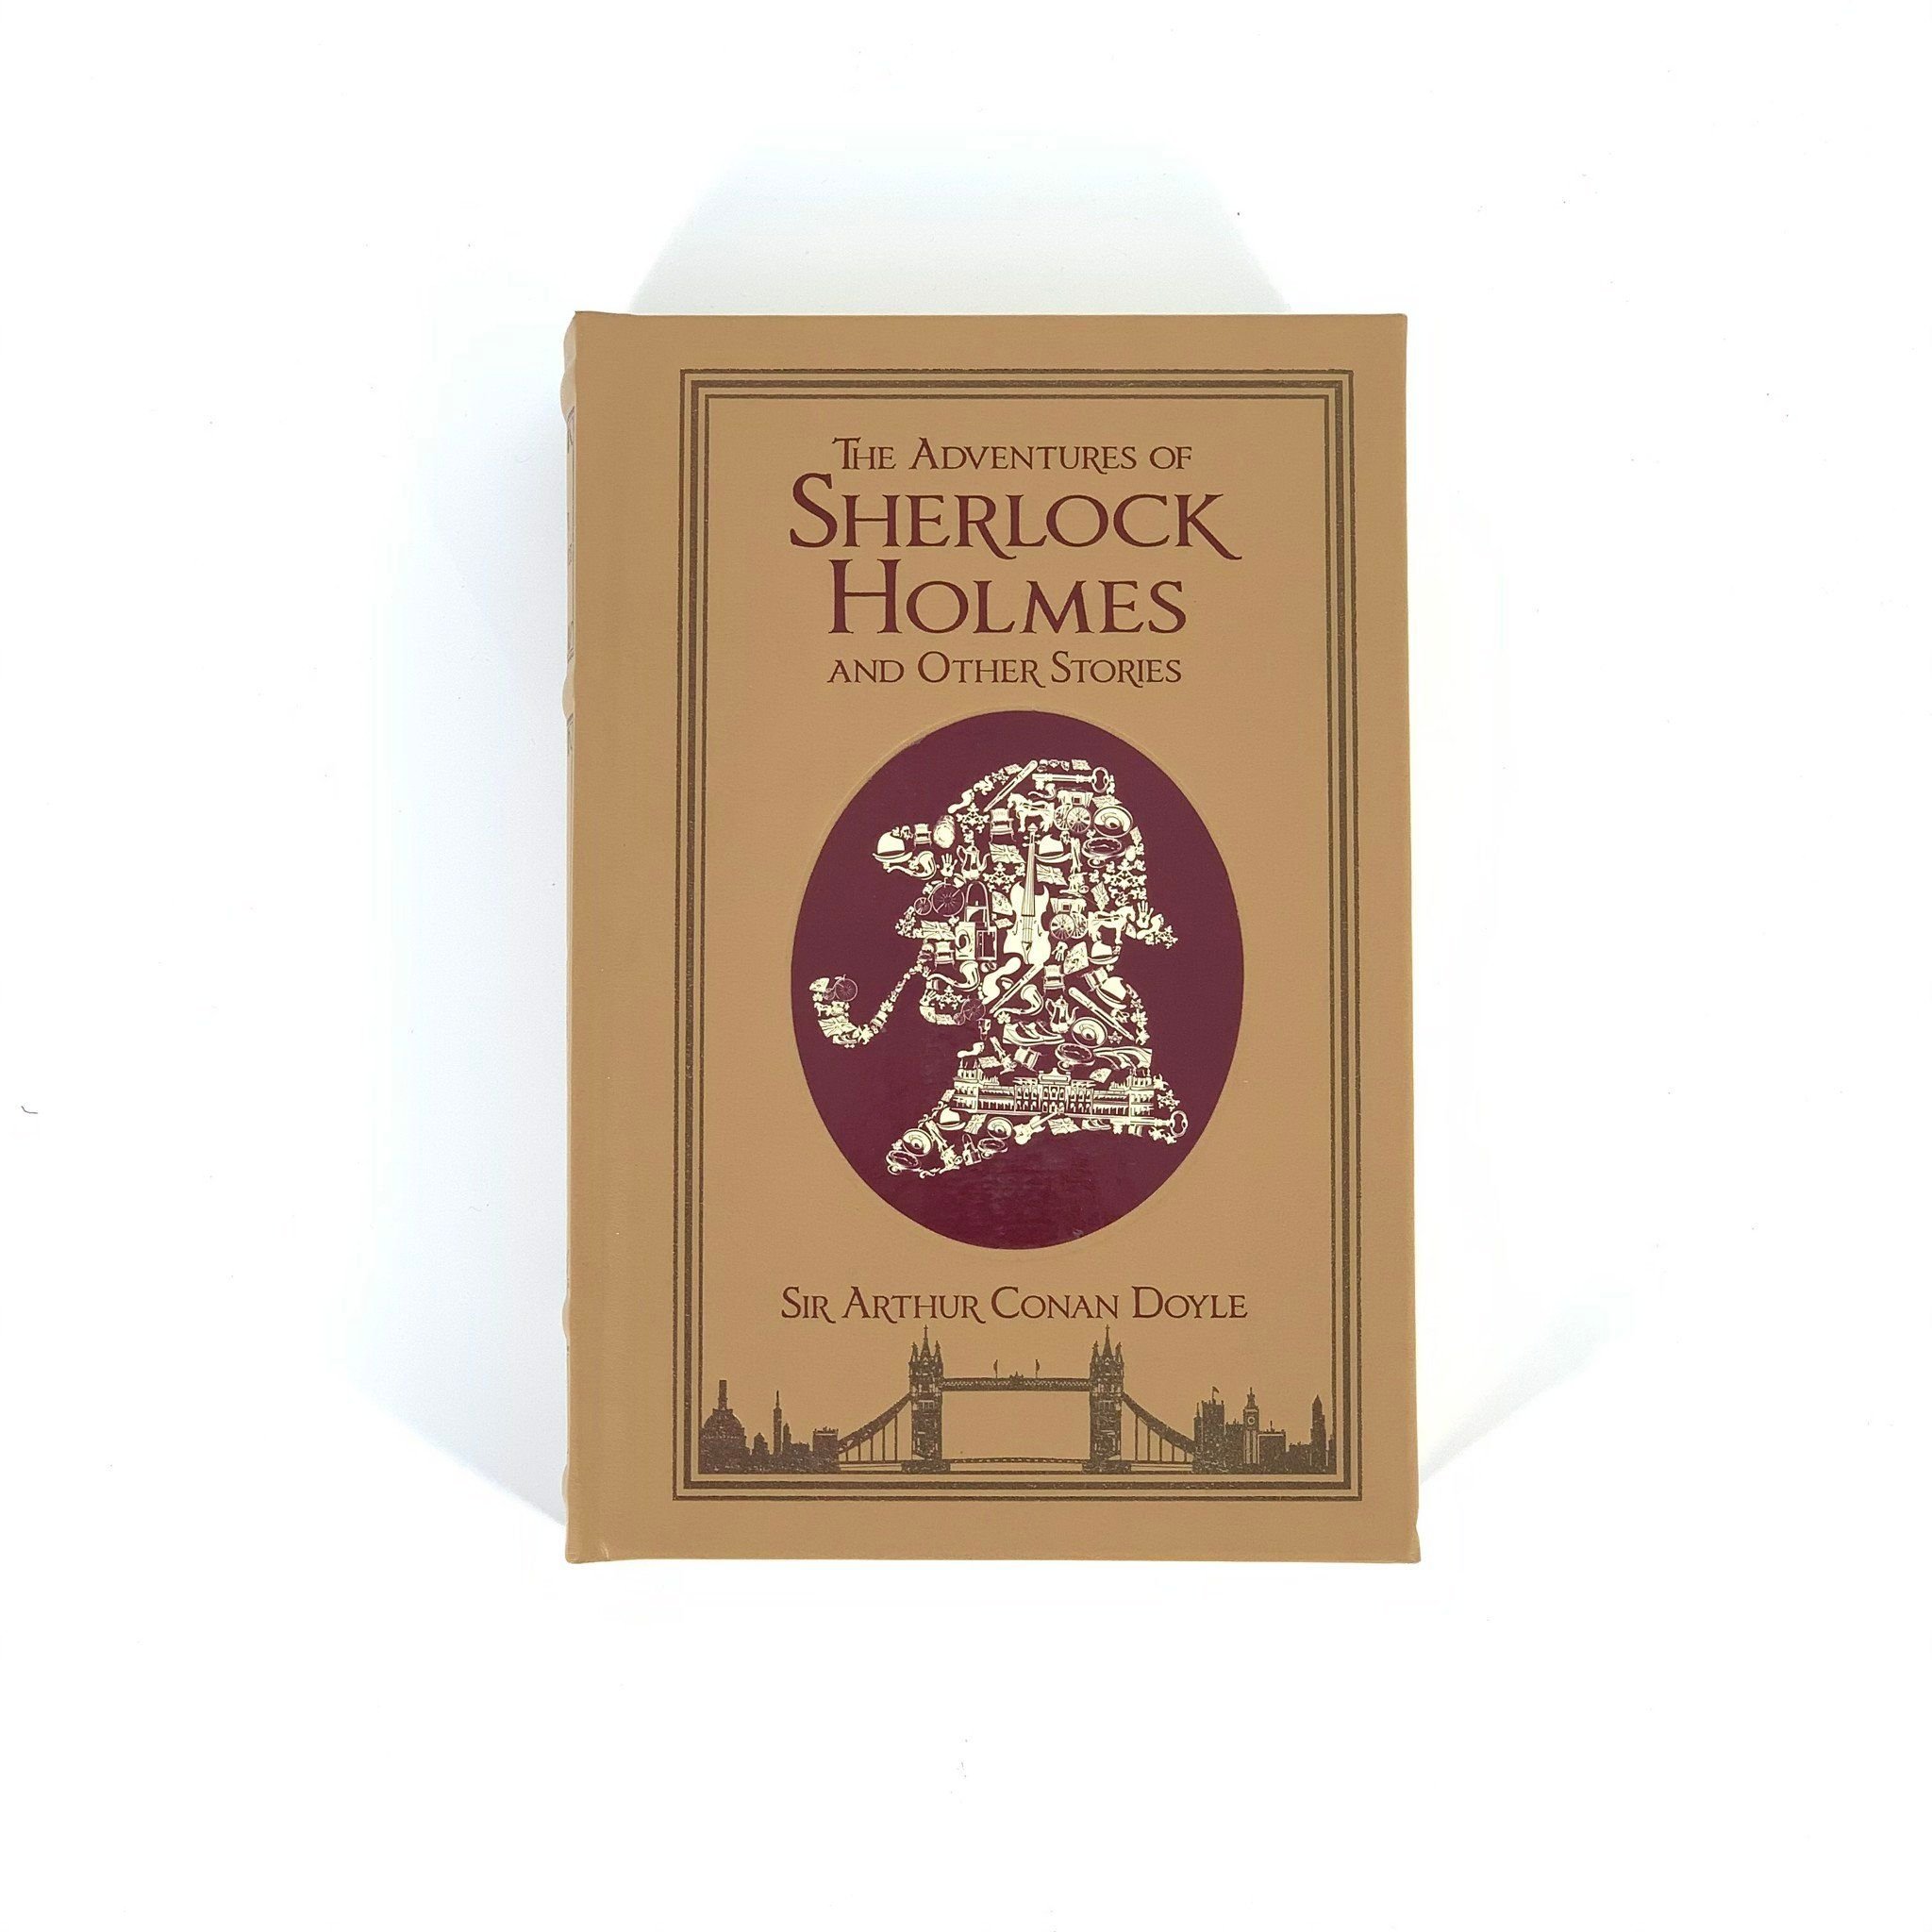  The Adventures of Sherlock Holmes and Other Stories_Sir Arthur Conan Doyle_9781607102113_Canterbury Classics 